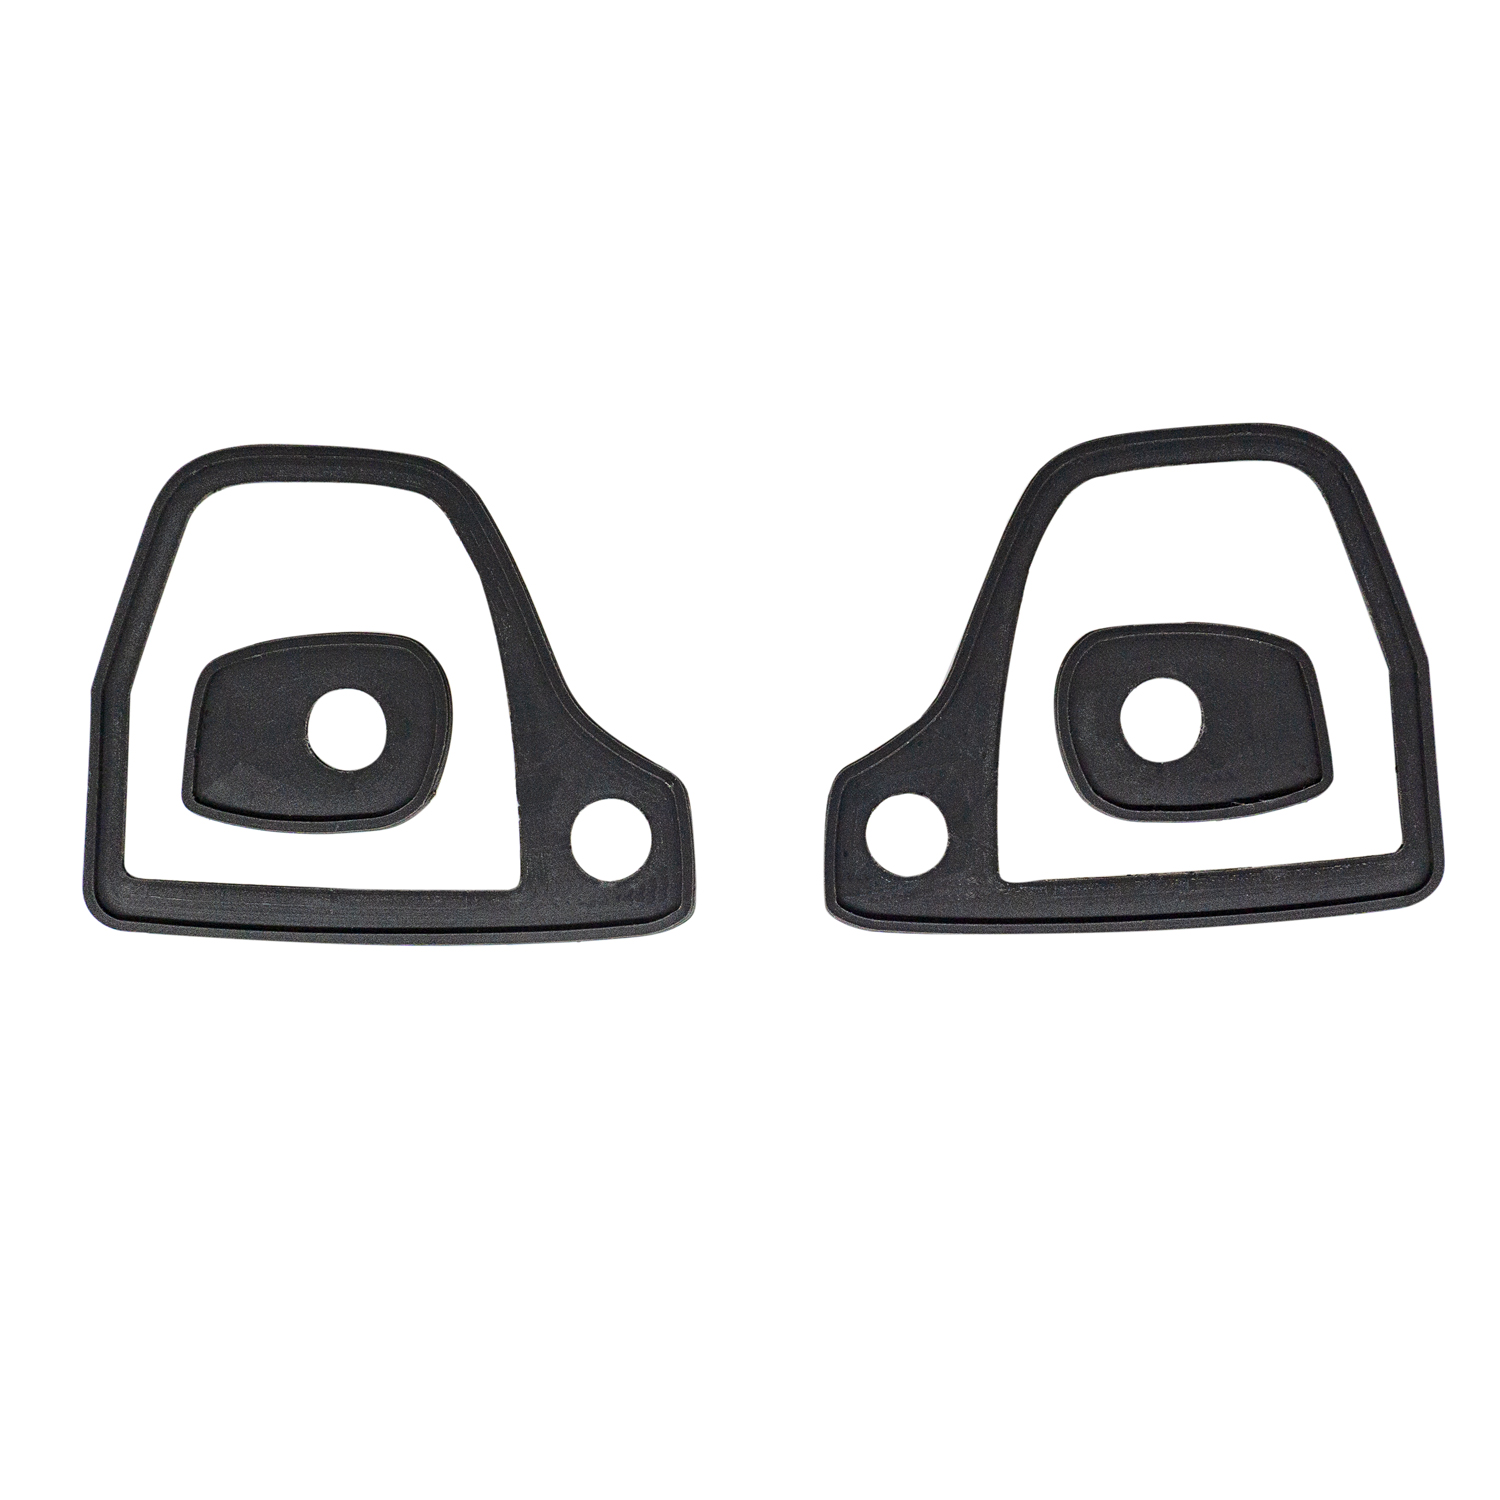 1974 Chevrolet C30 Door Handle Gasket Set Fits 73-87 Chevy and GMC Trucks OEM-Style Molded Lip-MP 806